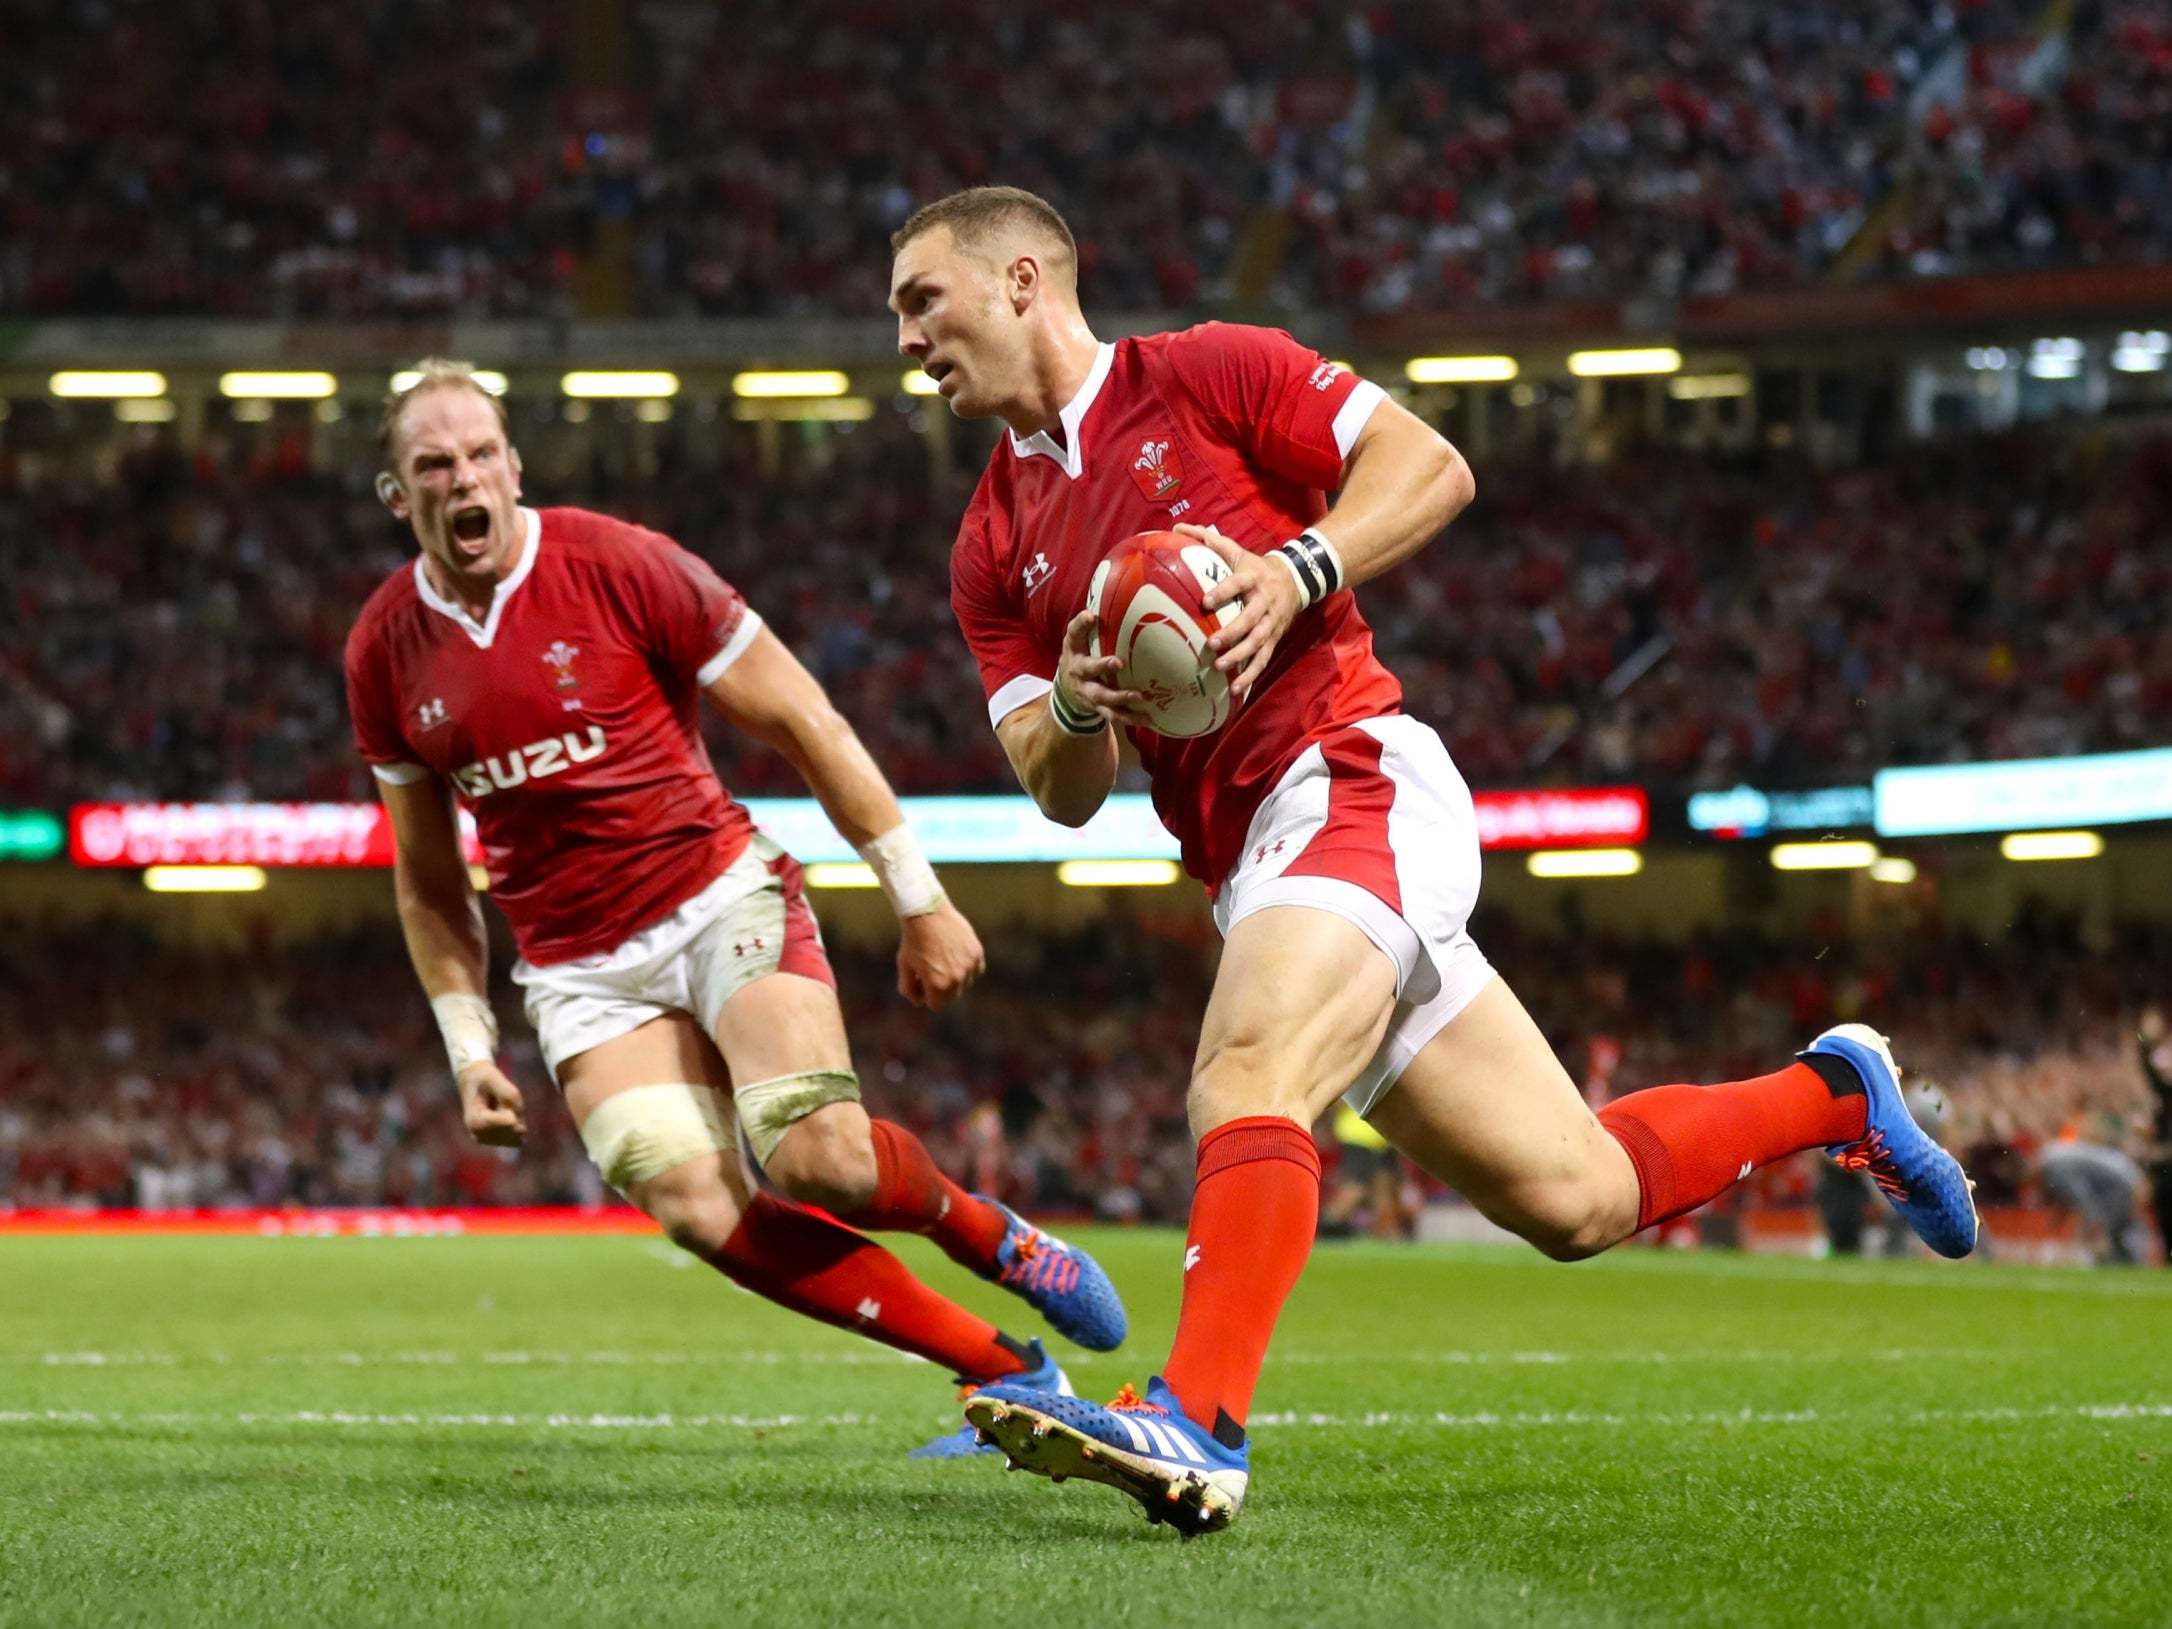 Wales vs England LIVE: Latest score and updates from Rugby World Cup